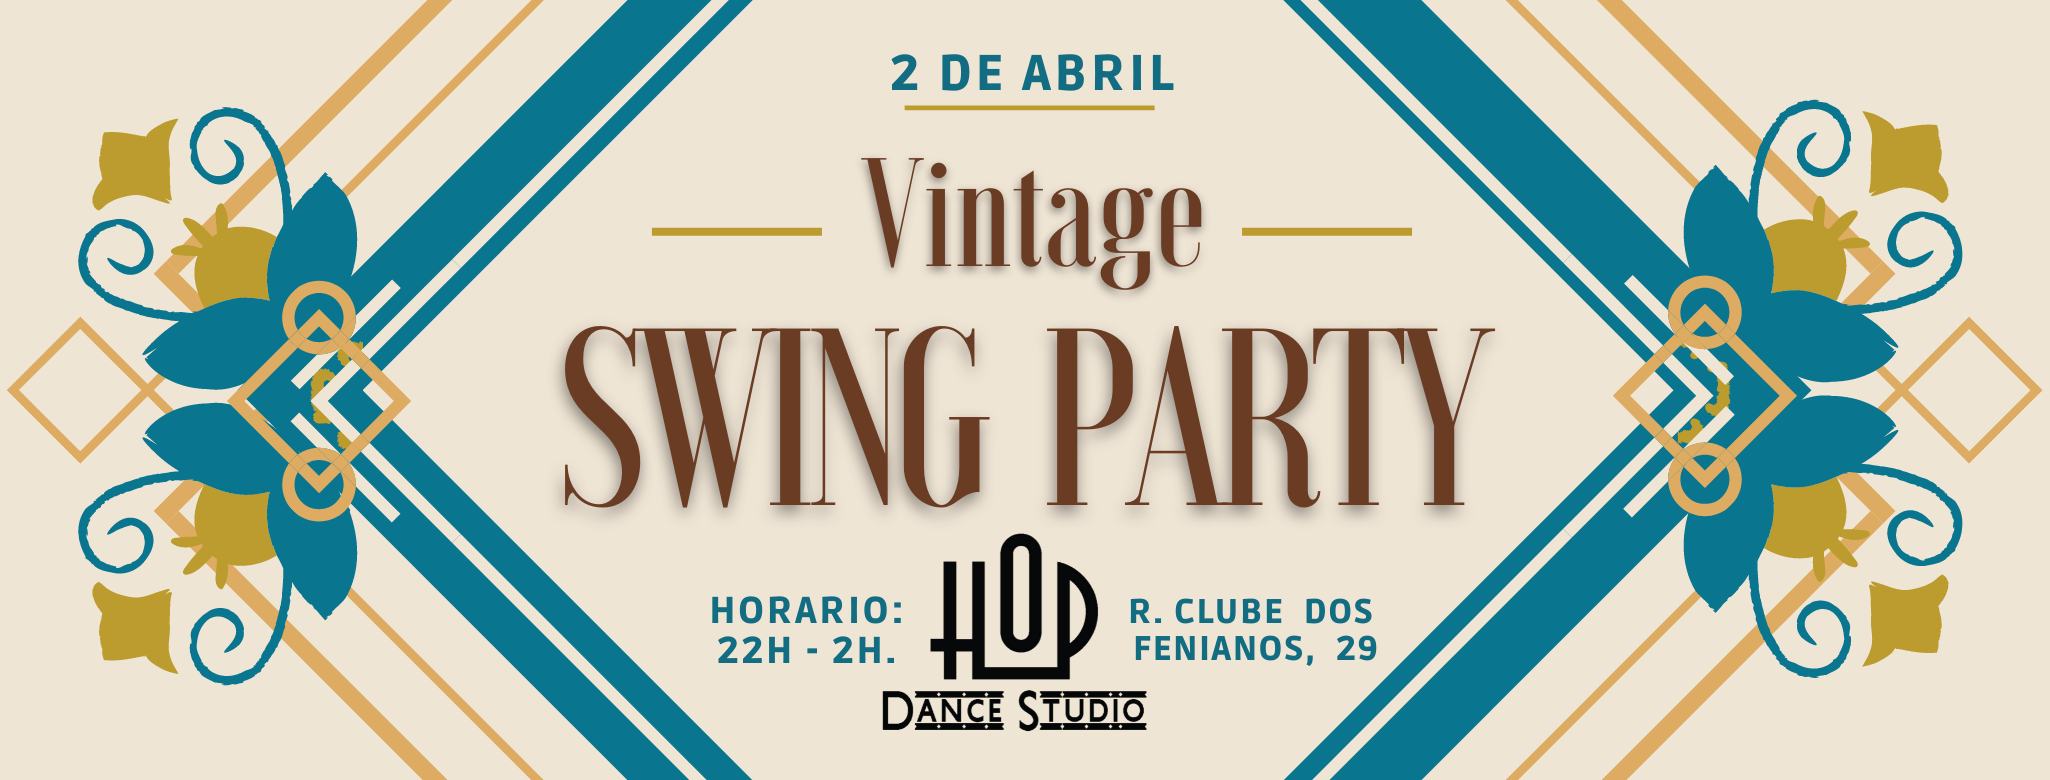 Vintage Swing Party - Clube Fenianos Portuenses